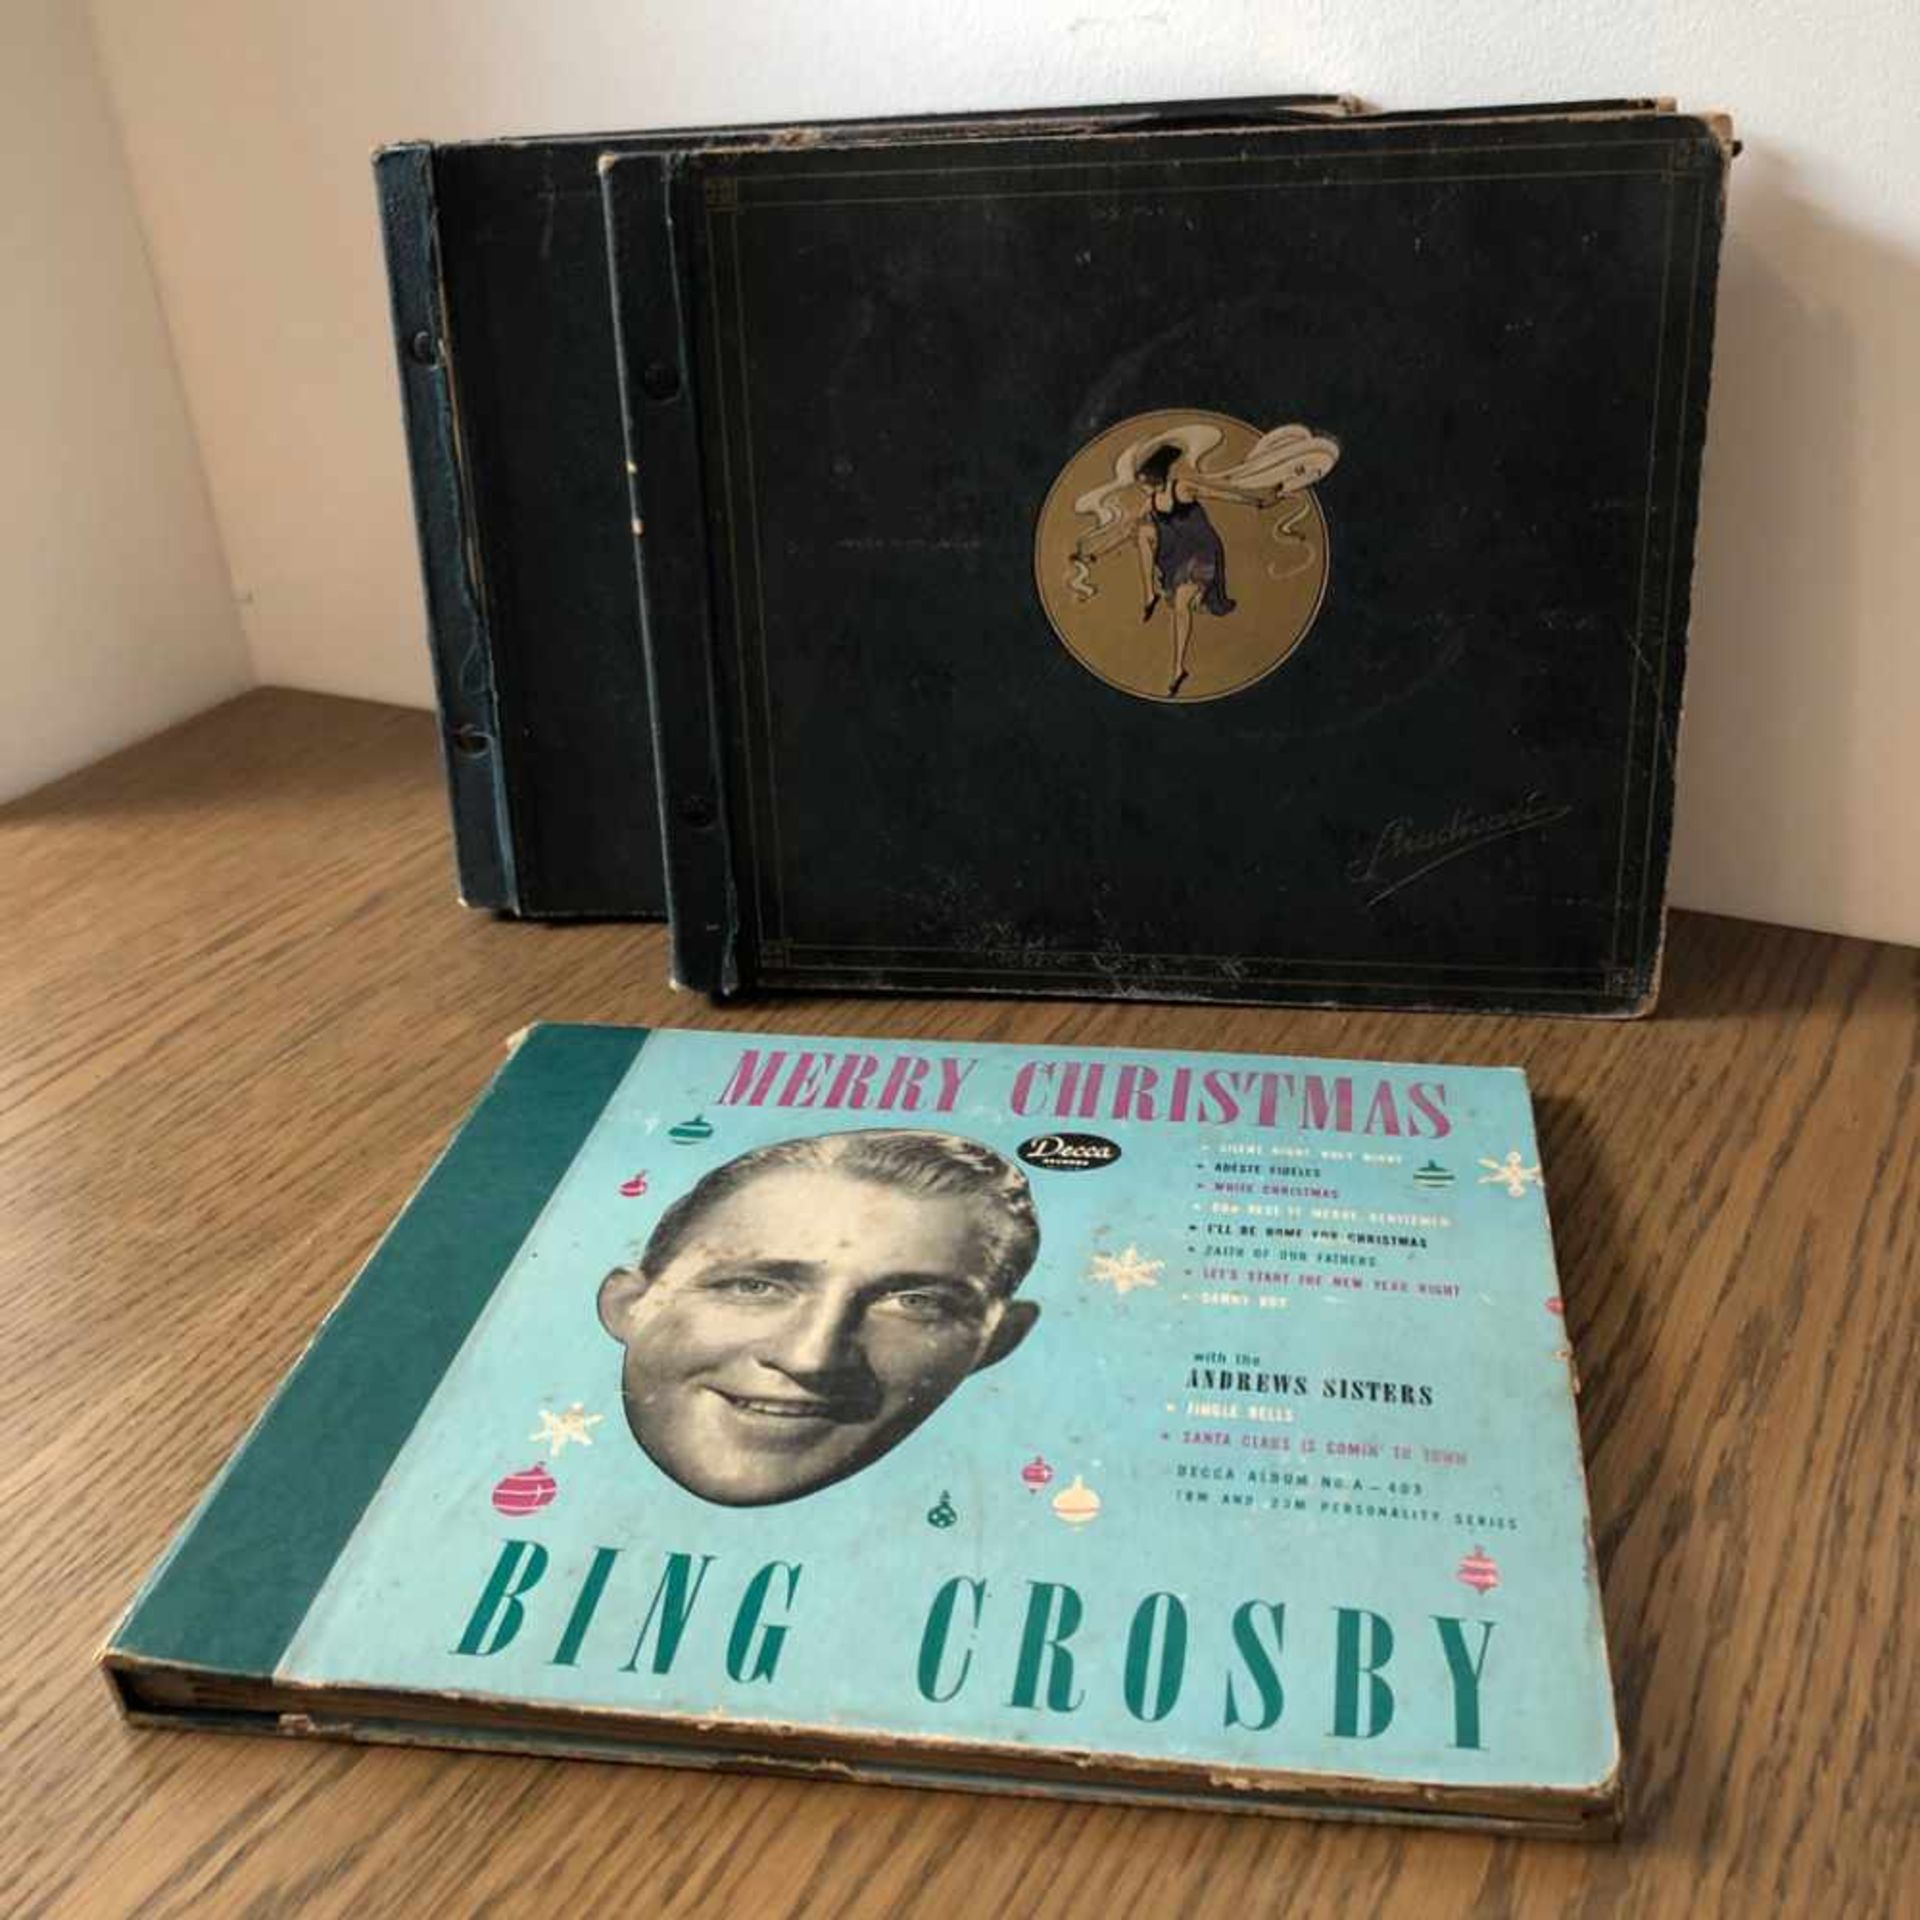 Set of 3 albums with 78RPM recordsSet of 3 albums with 78RPM record's from the US of Bing Crosby and